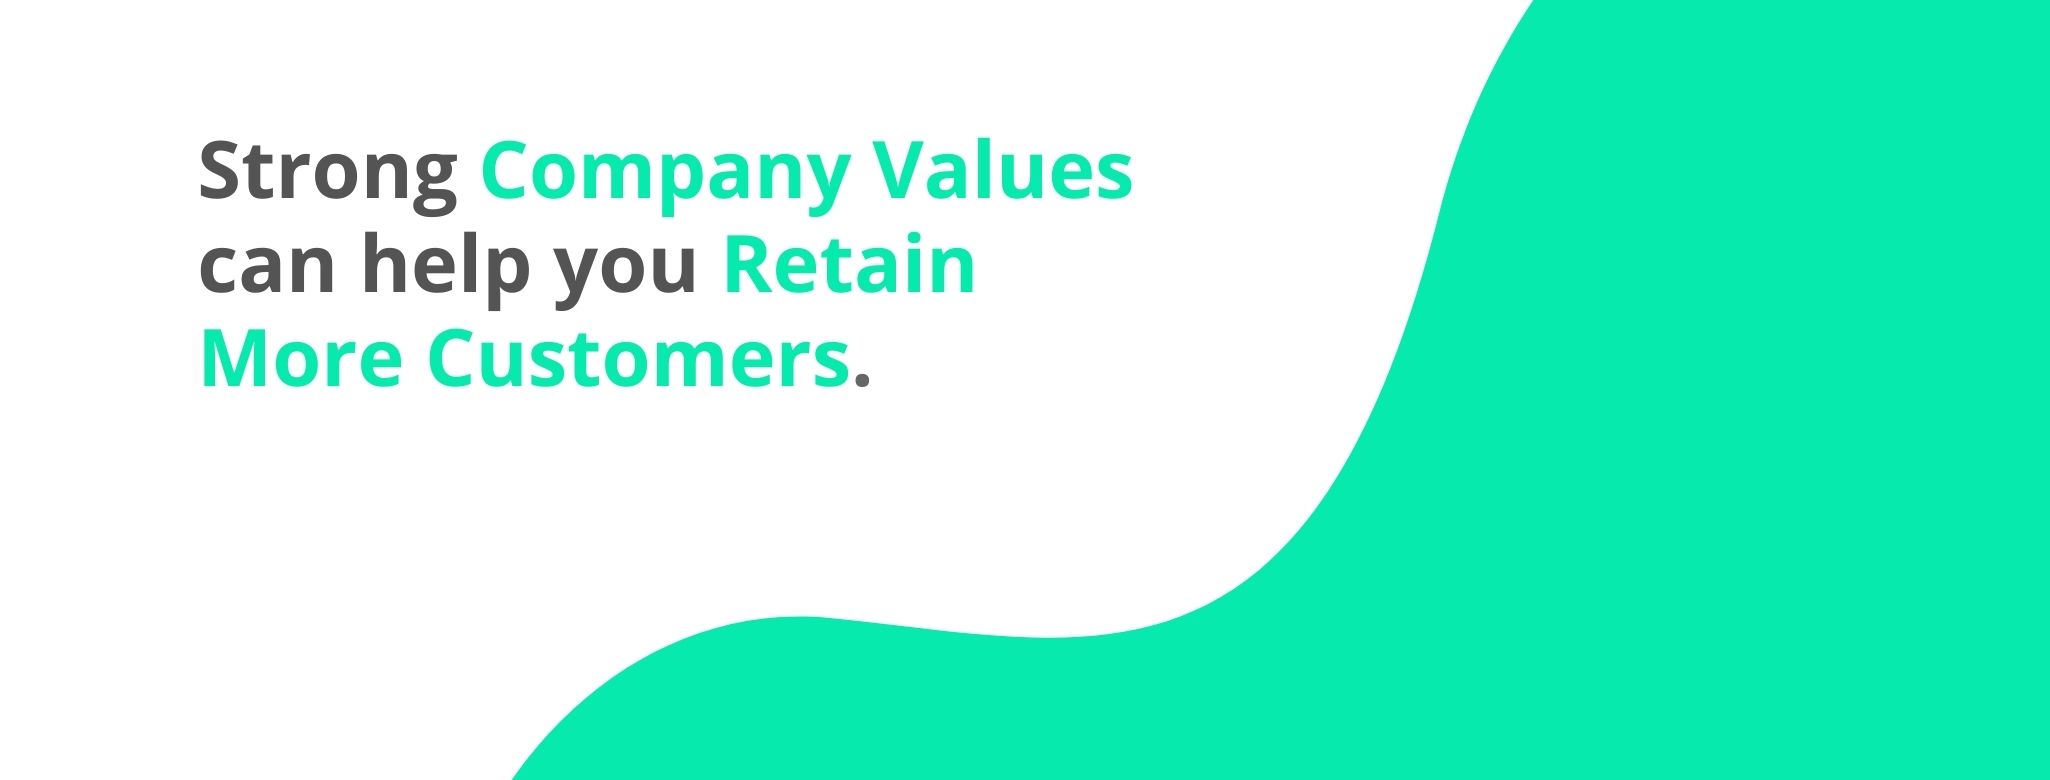 Strong company values can help you retain more customers - 32 Customer Retention Strategies - Replyco